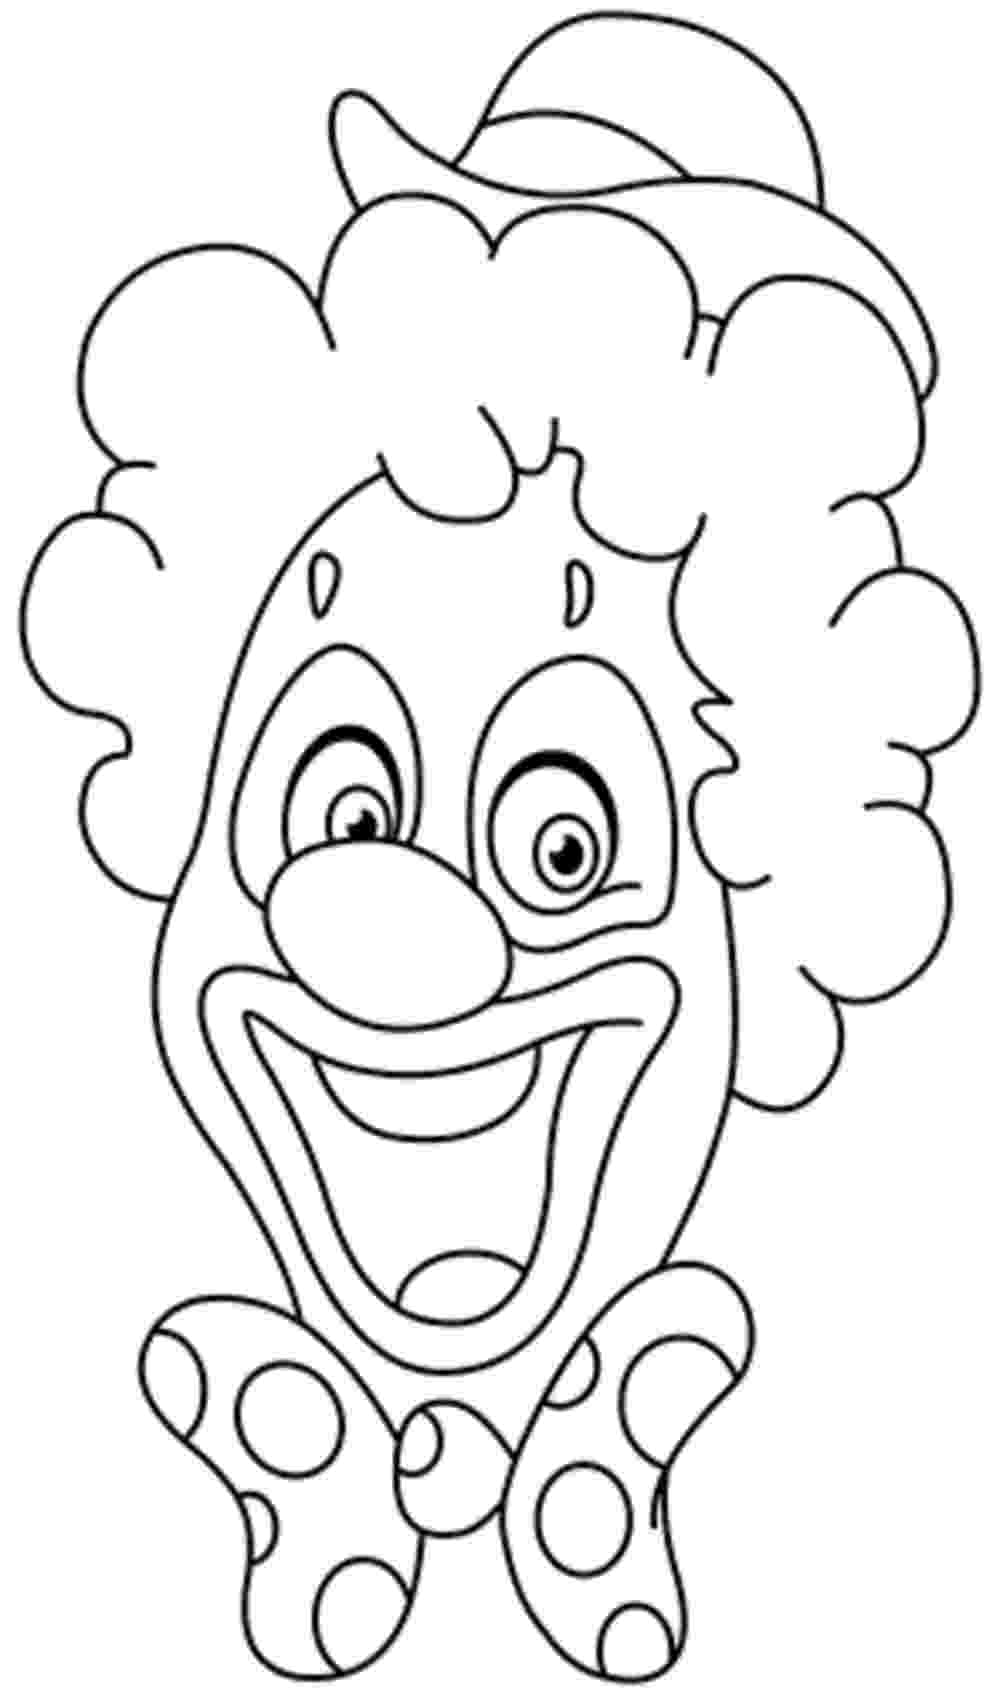 coloring pages clown free printable clown coloring pages for kids coloring pages clown 1 2